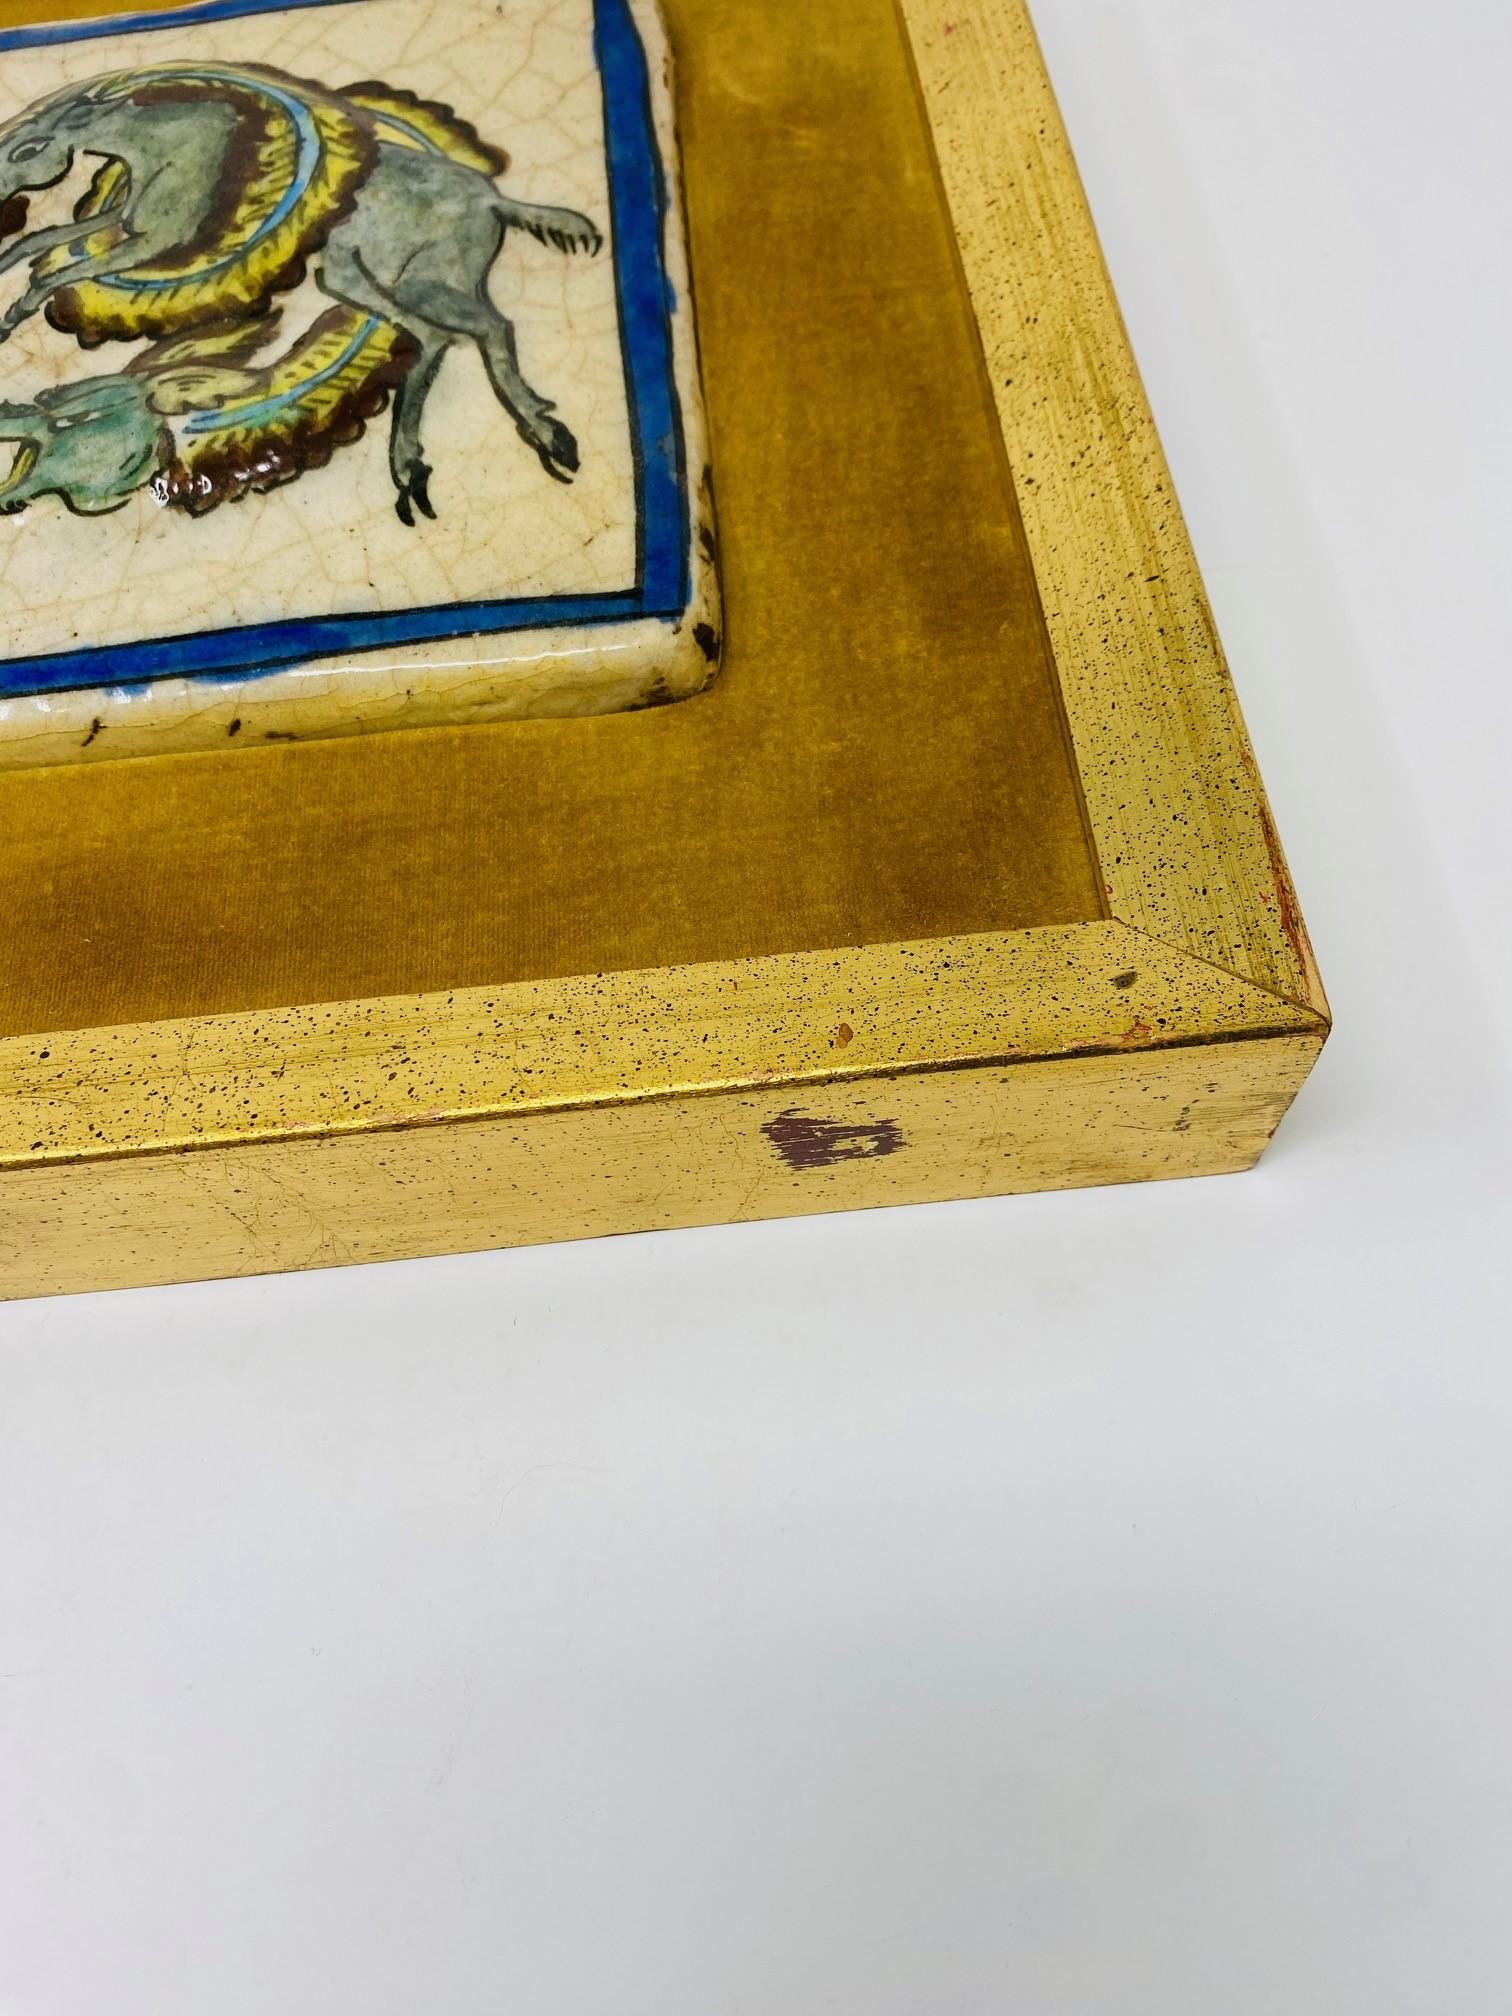 Beautifully framed art piece that evokes style and elegance. This beautiful antique chinoiserie tile is delightfully framed in rich gold velvet and gilt wood. The resulting piece is full of glamour and chic. The antique tile depicts 3 a battle